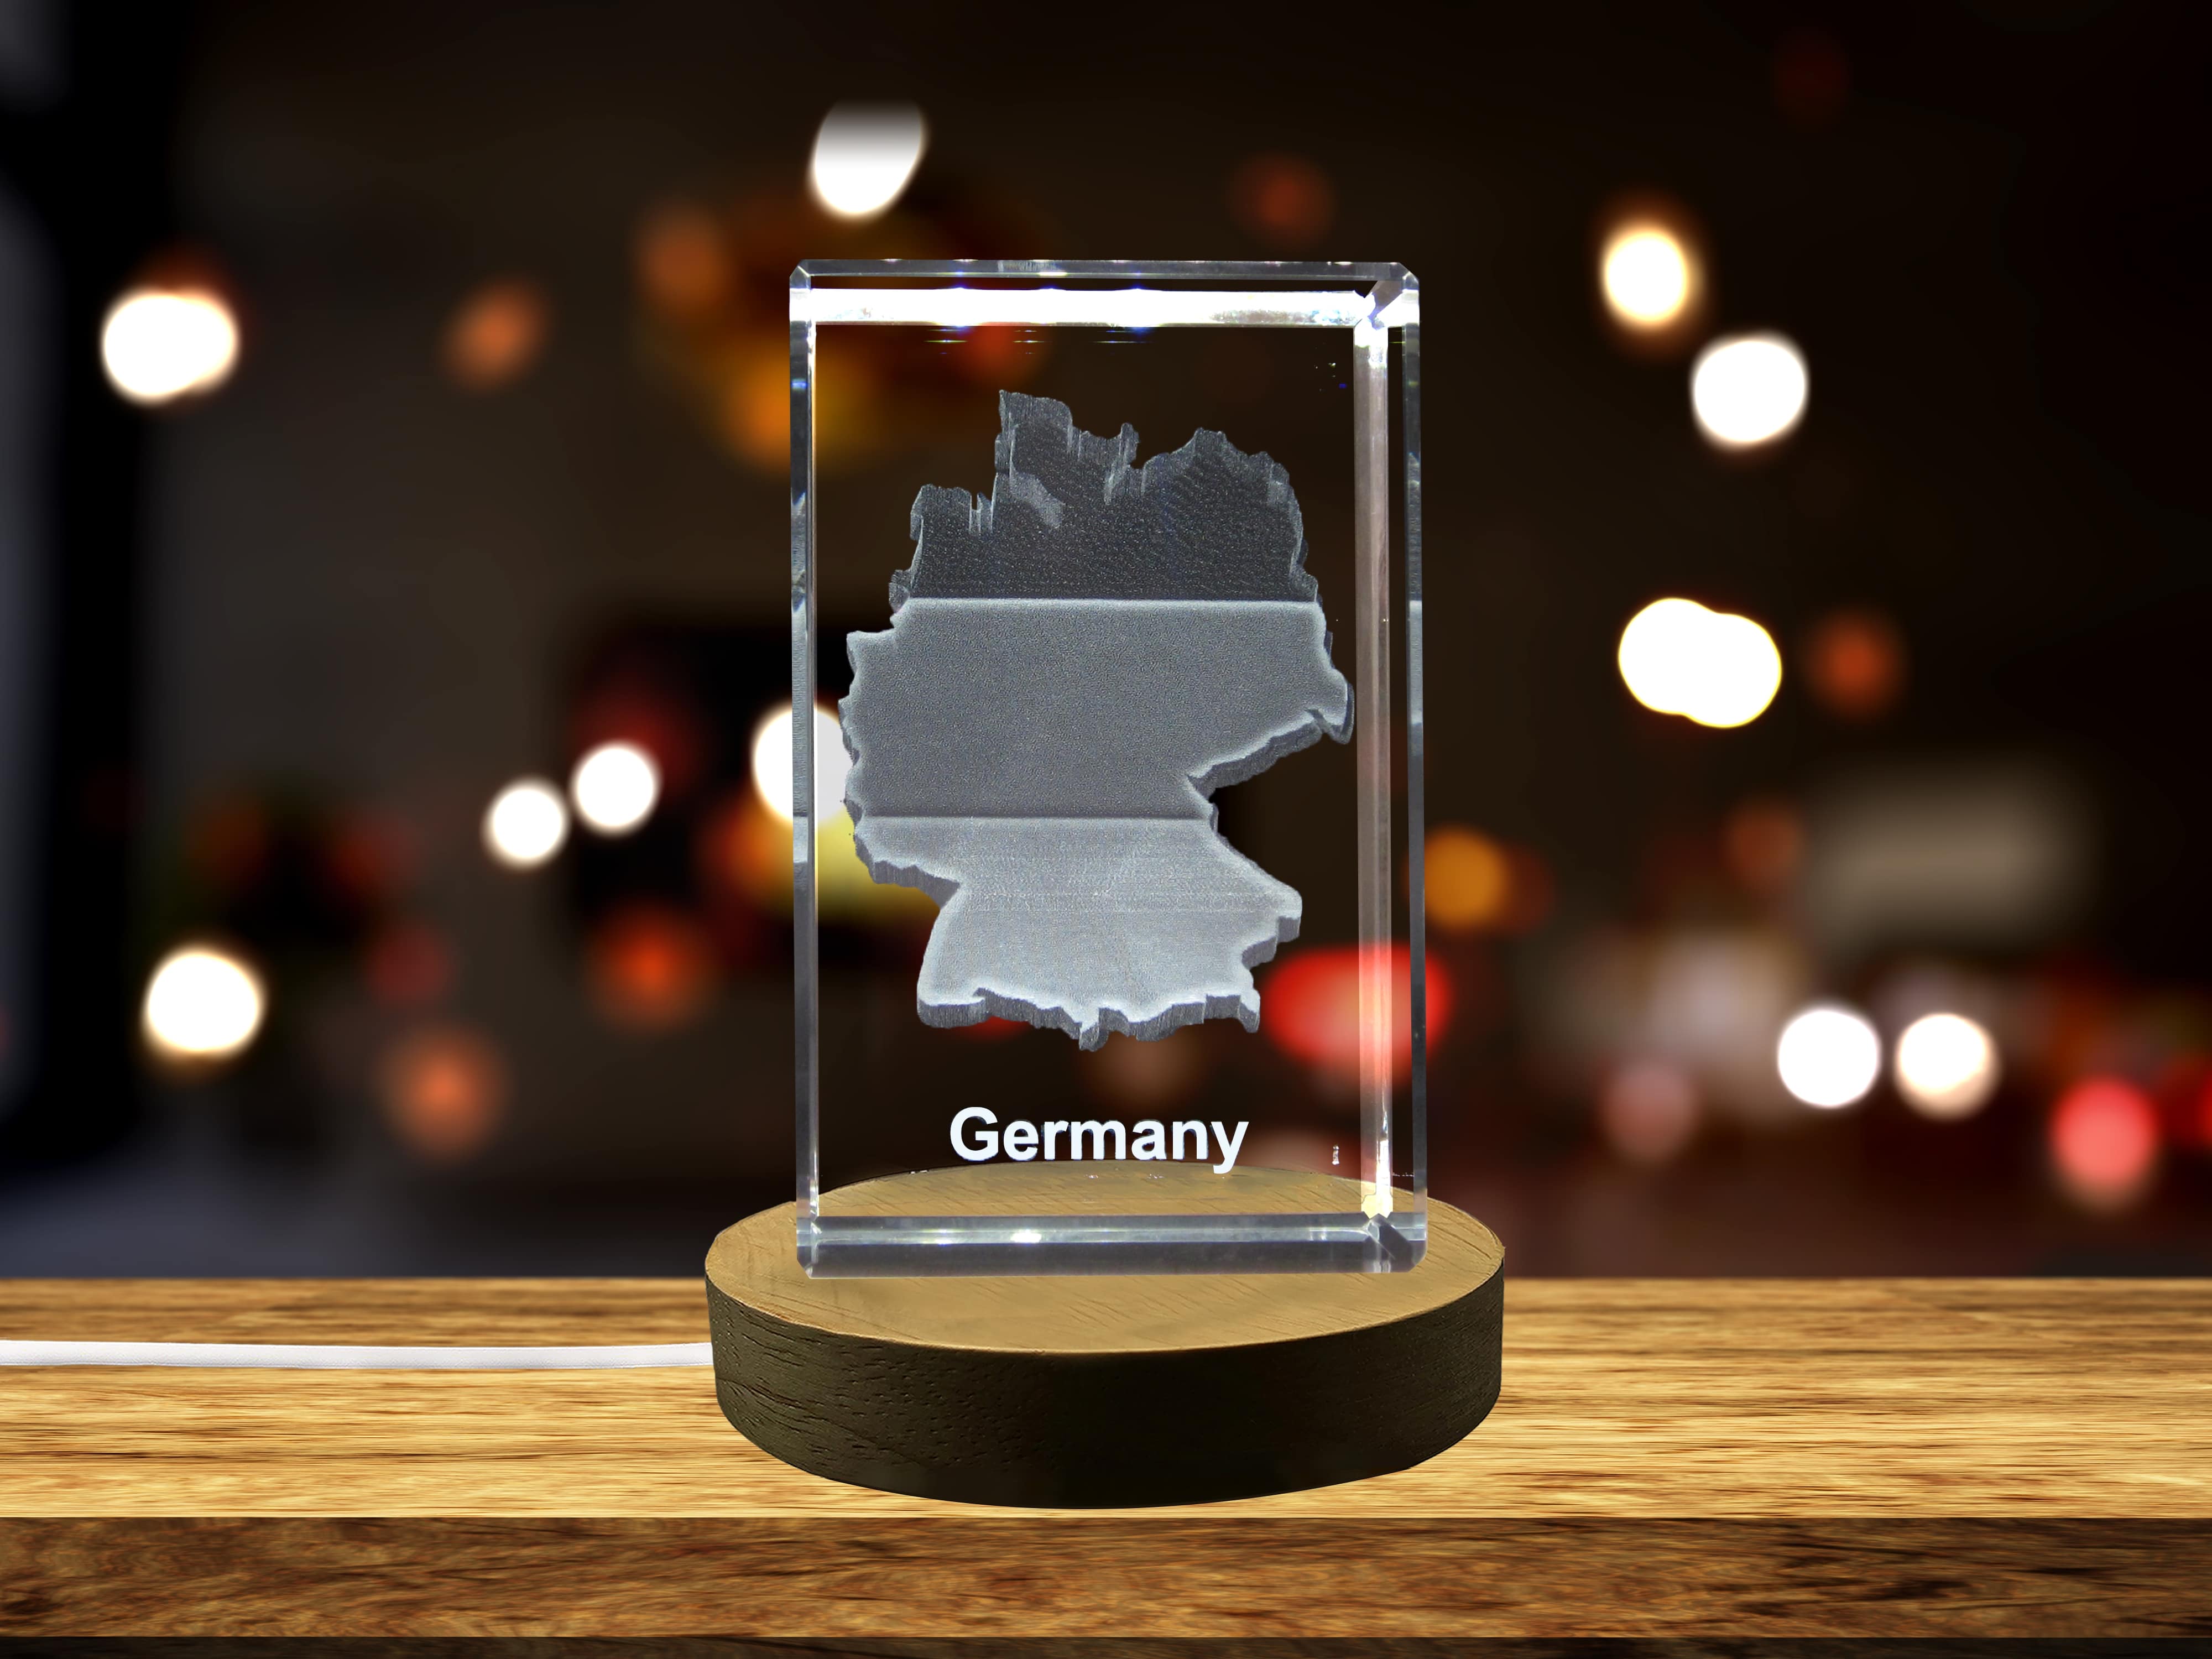 Germany 3D Engraved Crystal 3D Engraved Crystal Keepsake/Gift/Decor/Collectible/Souvenir A&B Crystal Collection